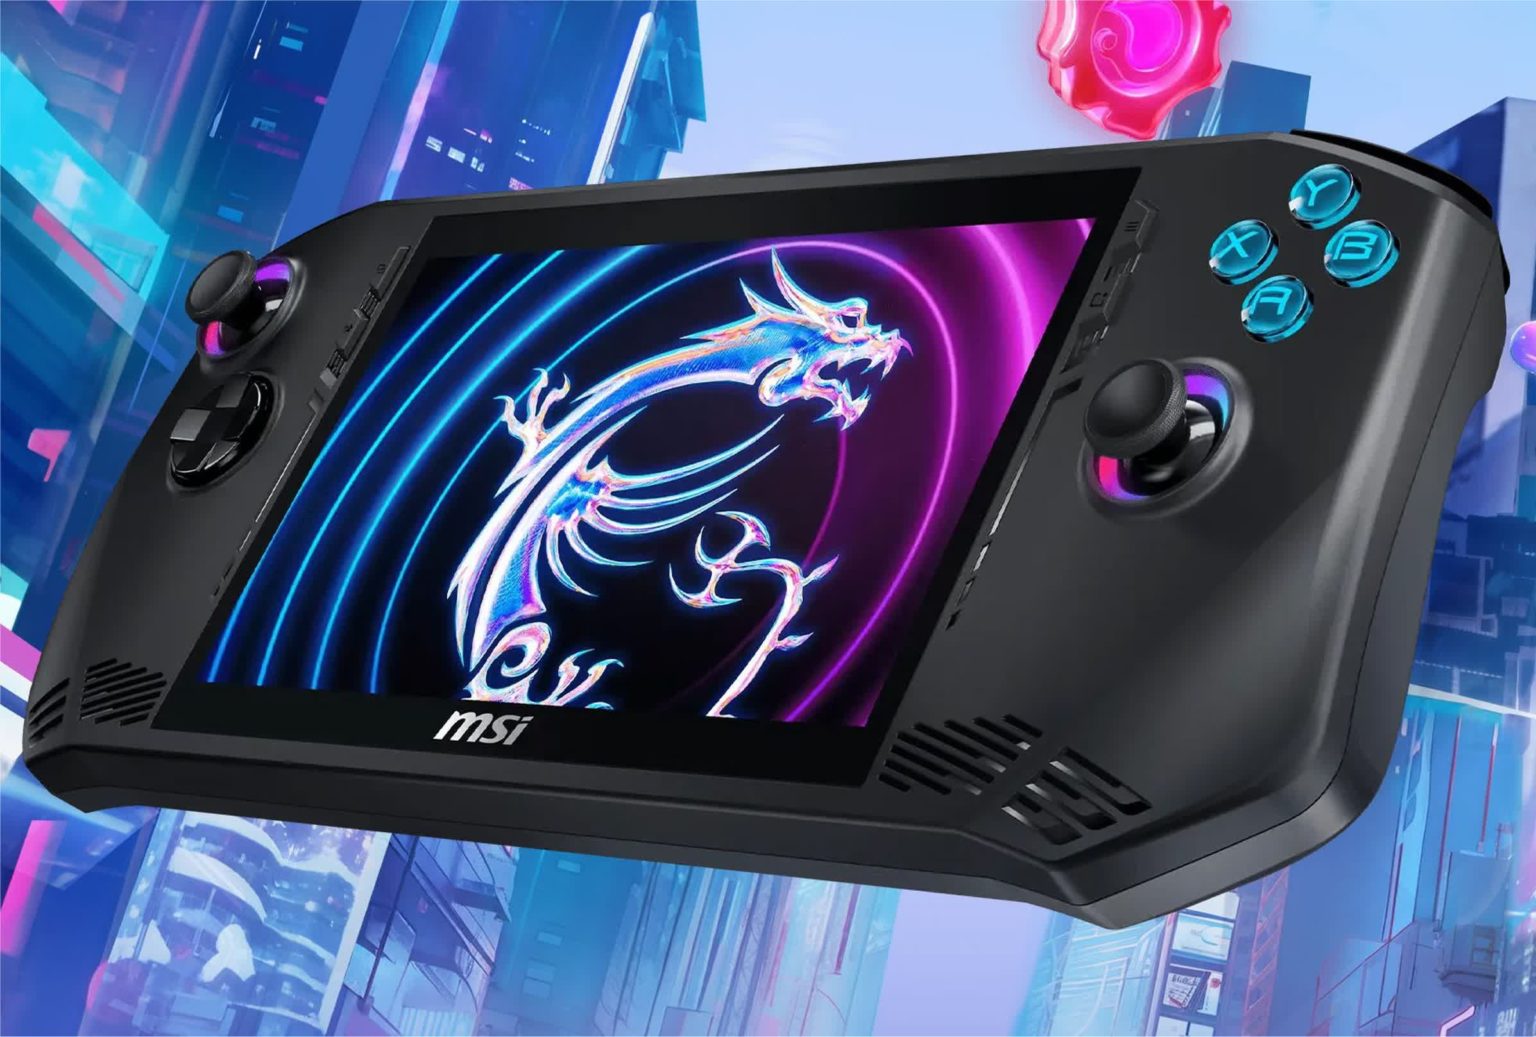 The MSI Claw gaming handheld is ready to battle the Steam Deck